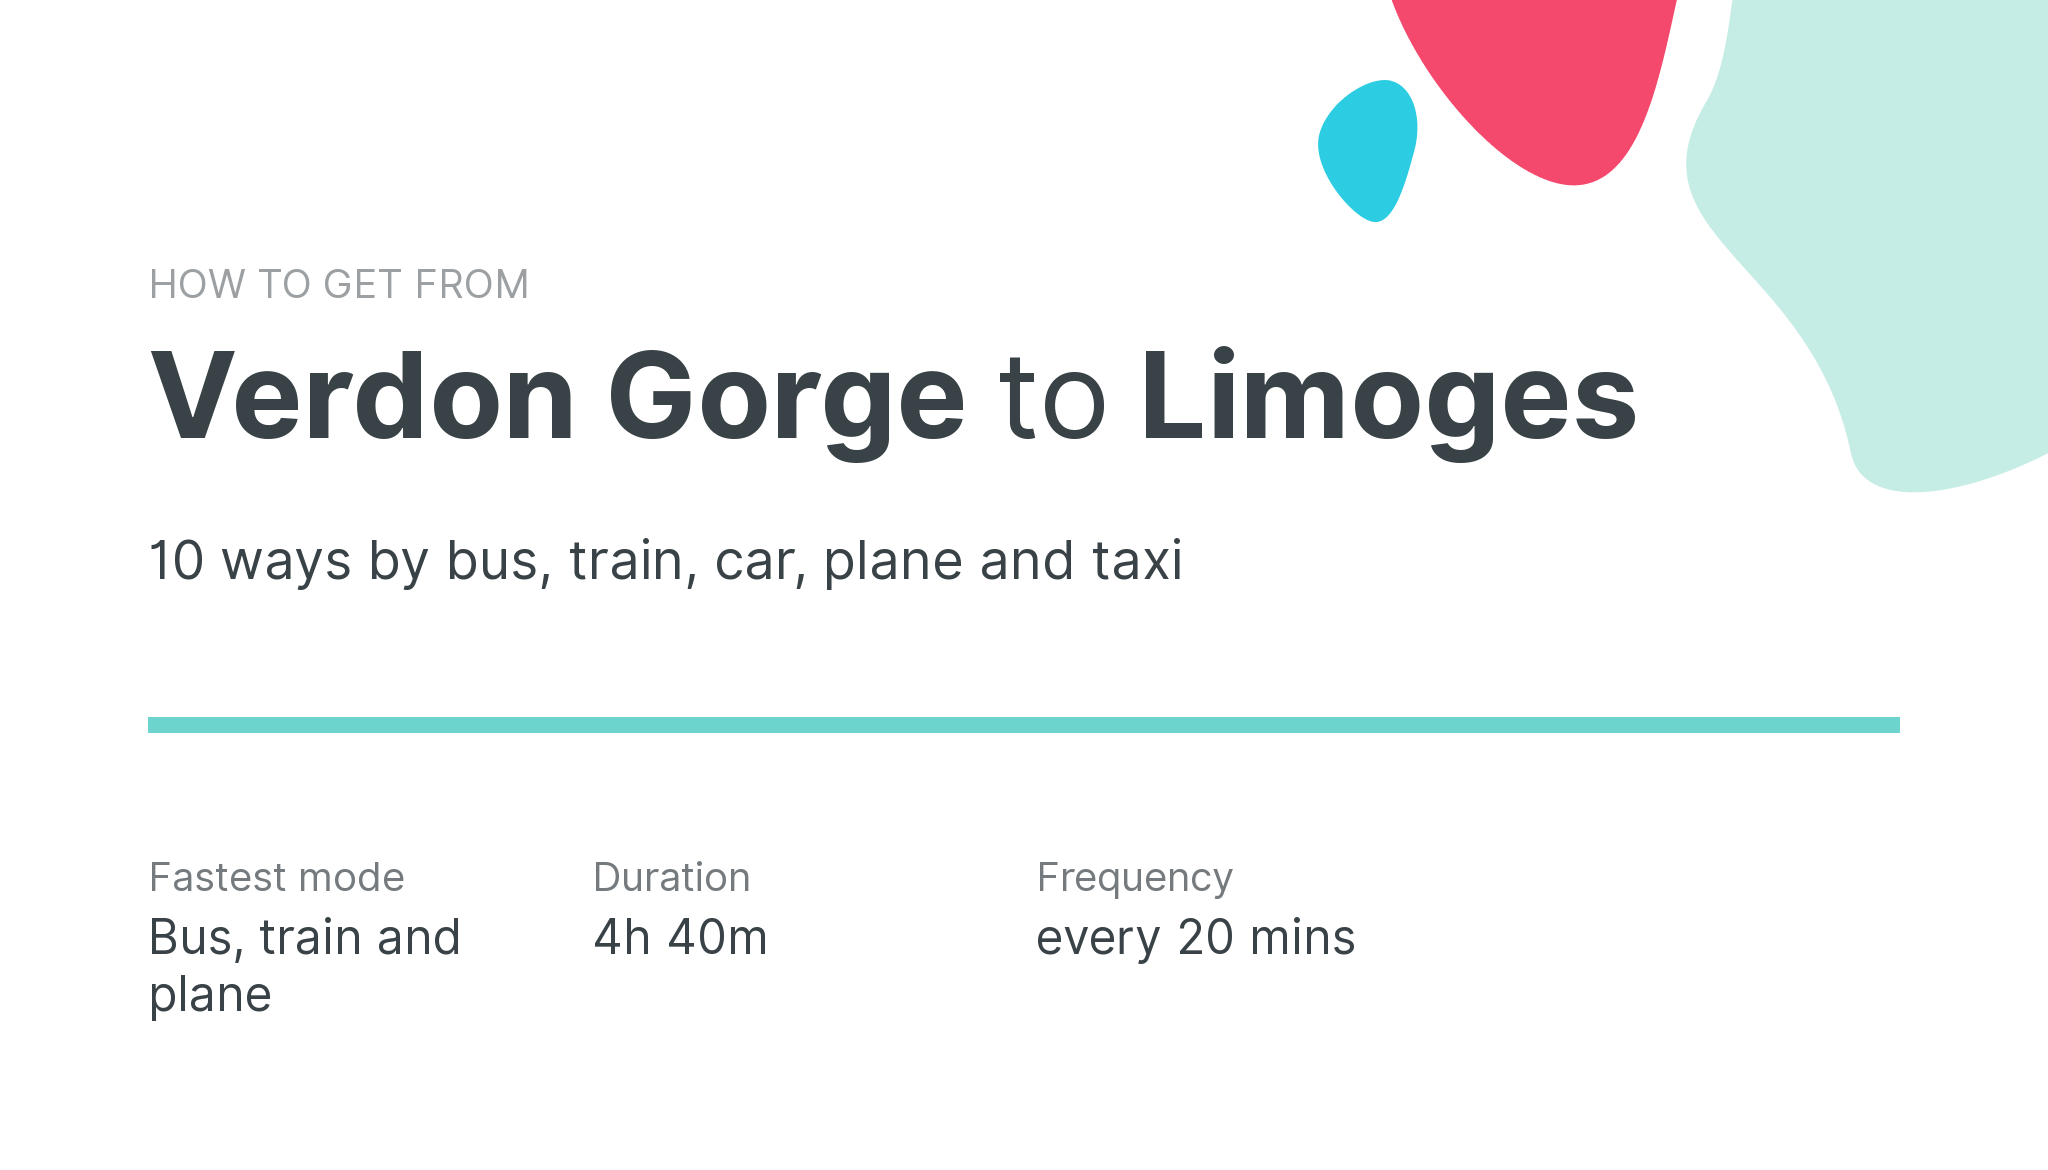 How do I get from Verdon Gorge to Limoges